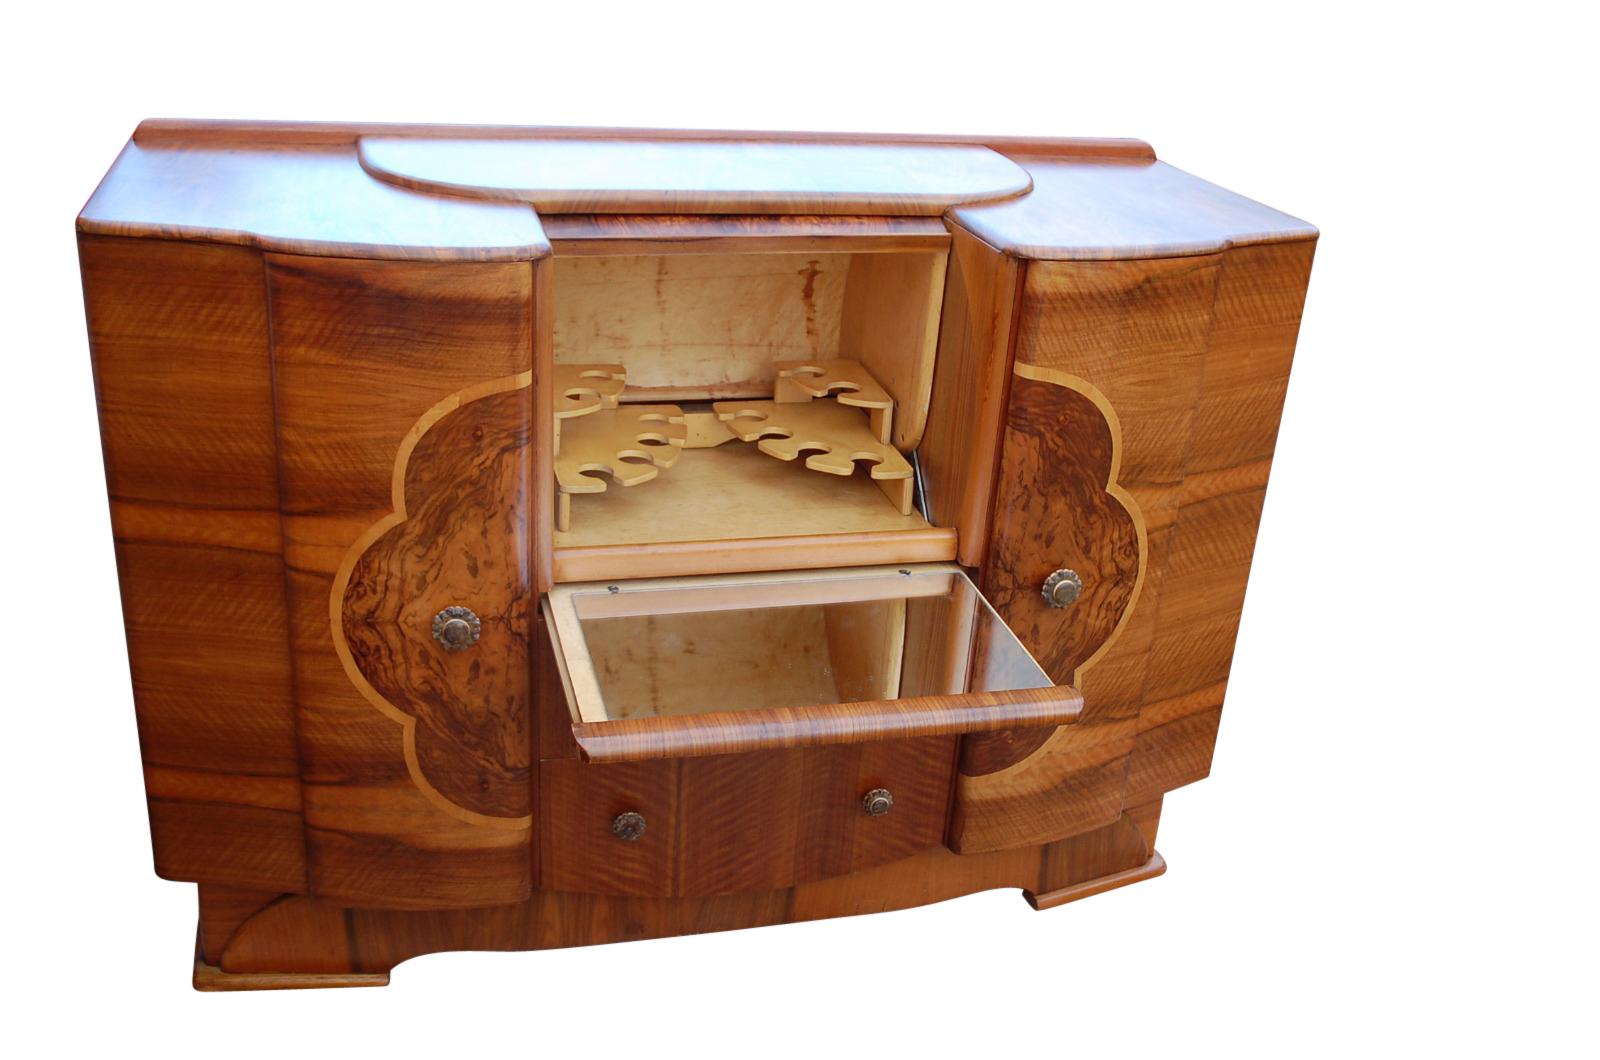 Great shaped piece of Art Deco furniture is both a cocktail cabinet and sideboard.
It has two large side cupboards and two drawers beneath the roll top cocktail cabinet.
Below the cocktail cabinet is a pull out / pull-out mirrored serving